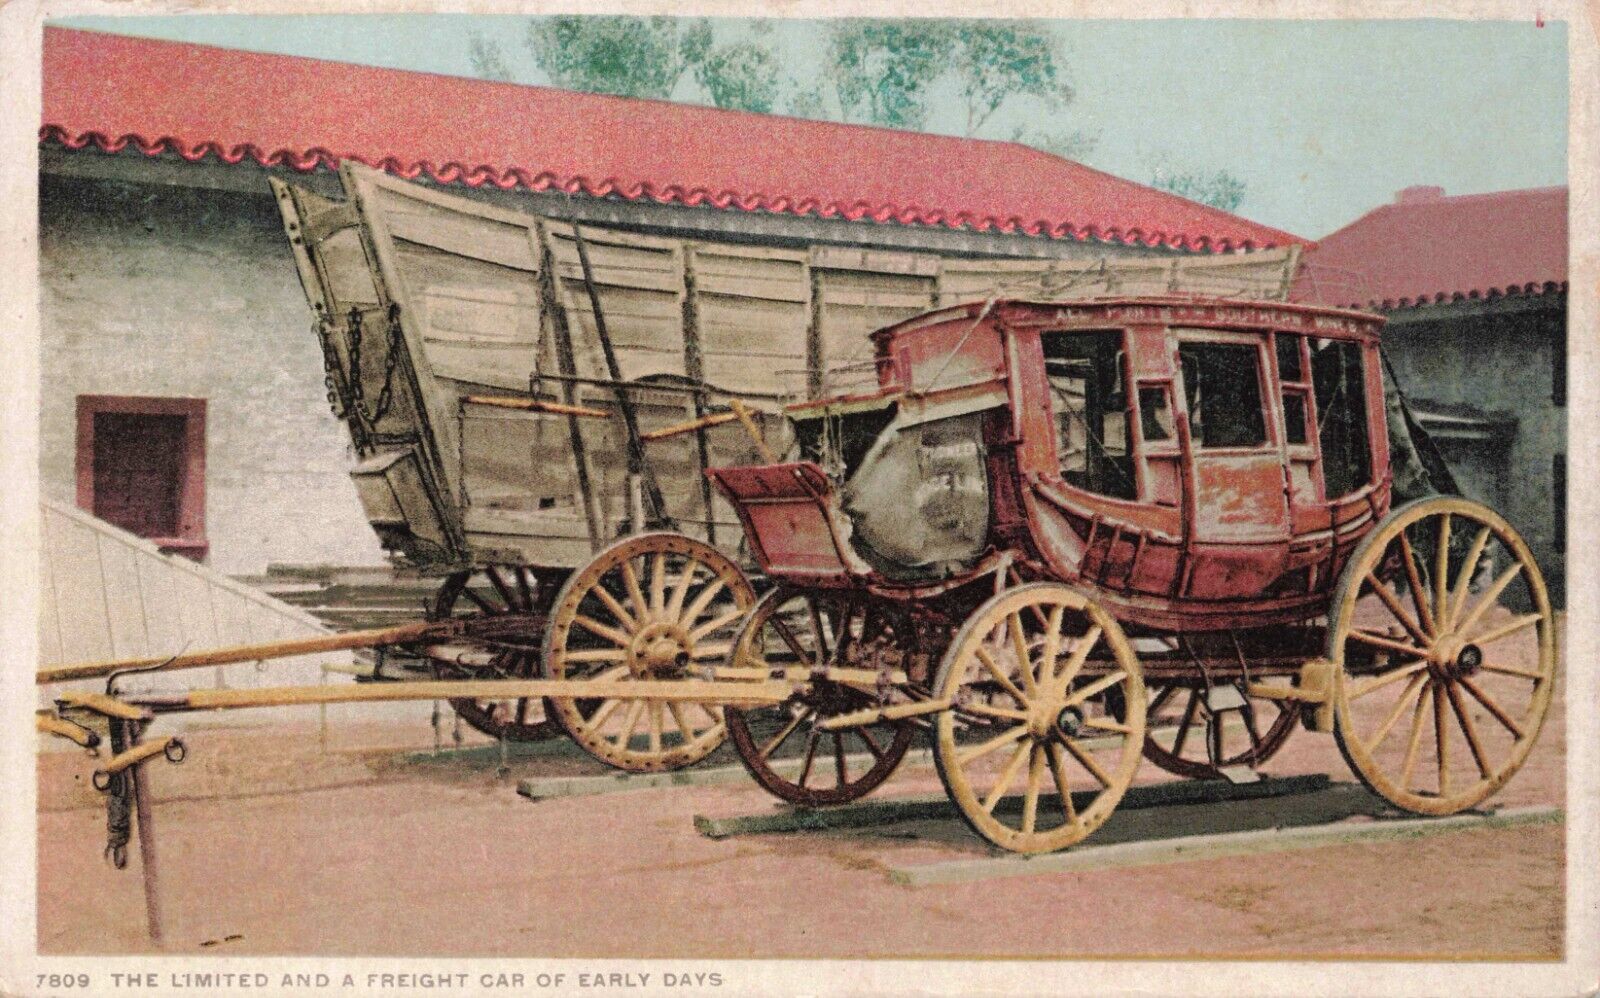 Lovely Phostint of Stagecoach & Freight Car of Early Days Vintage Postcard